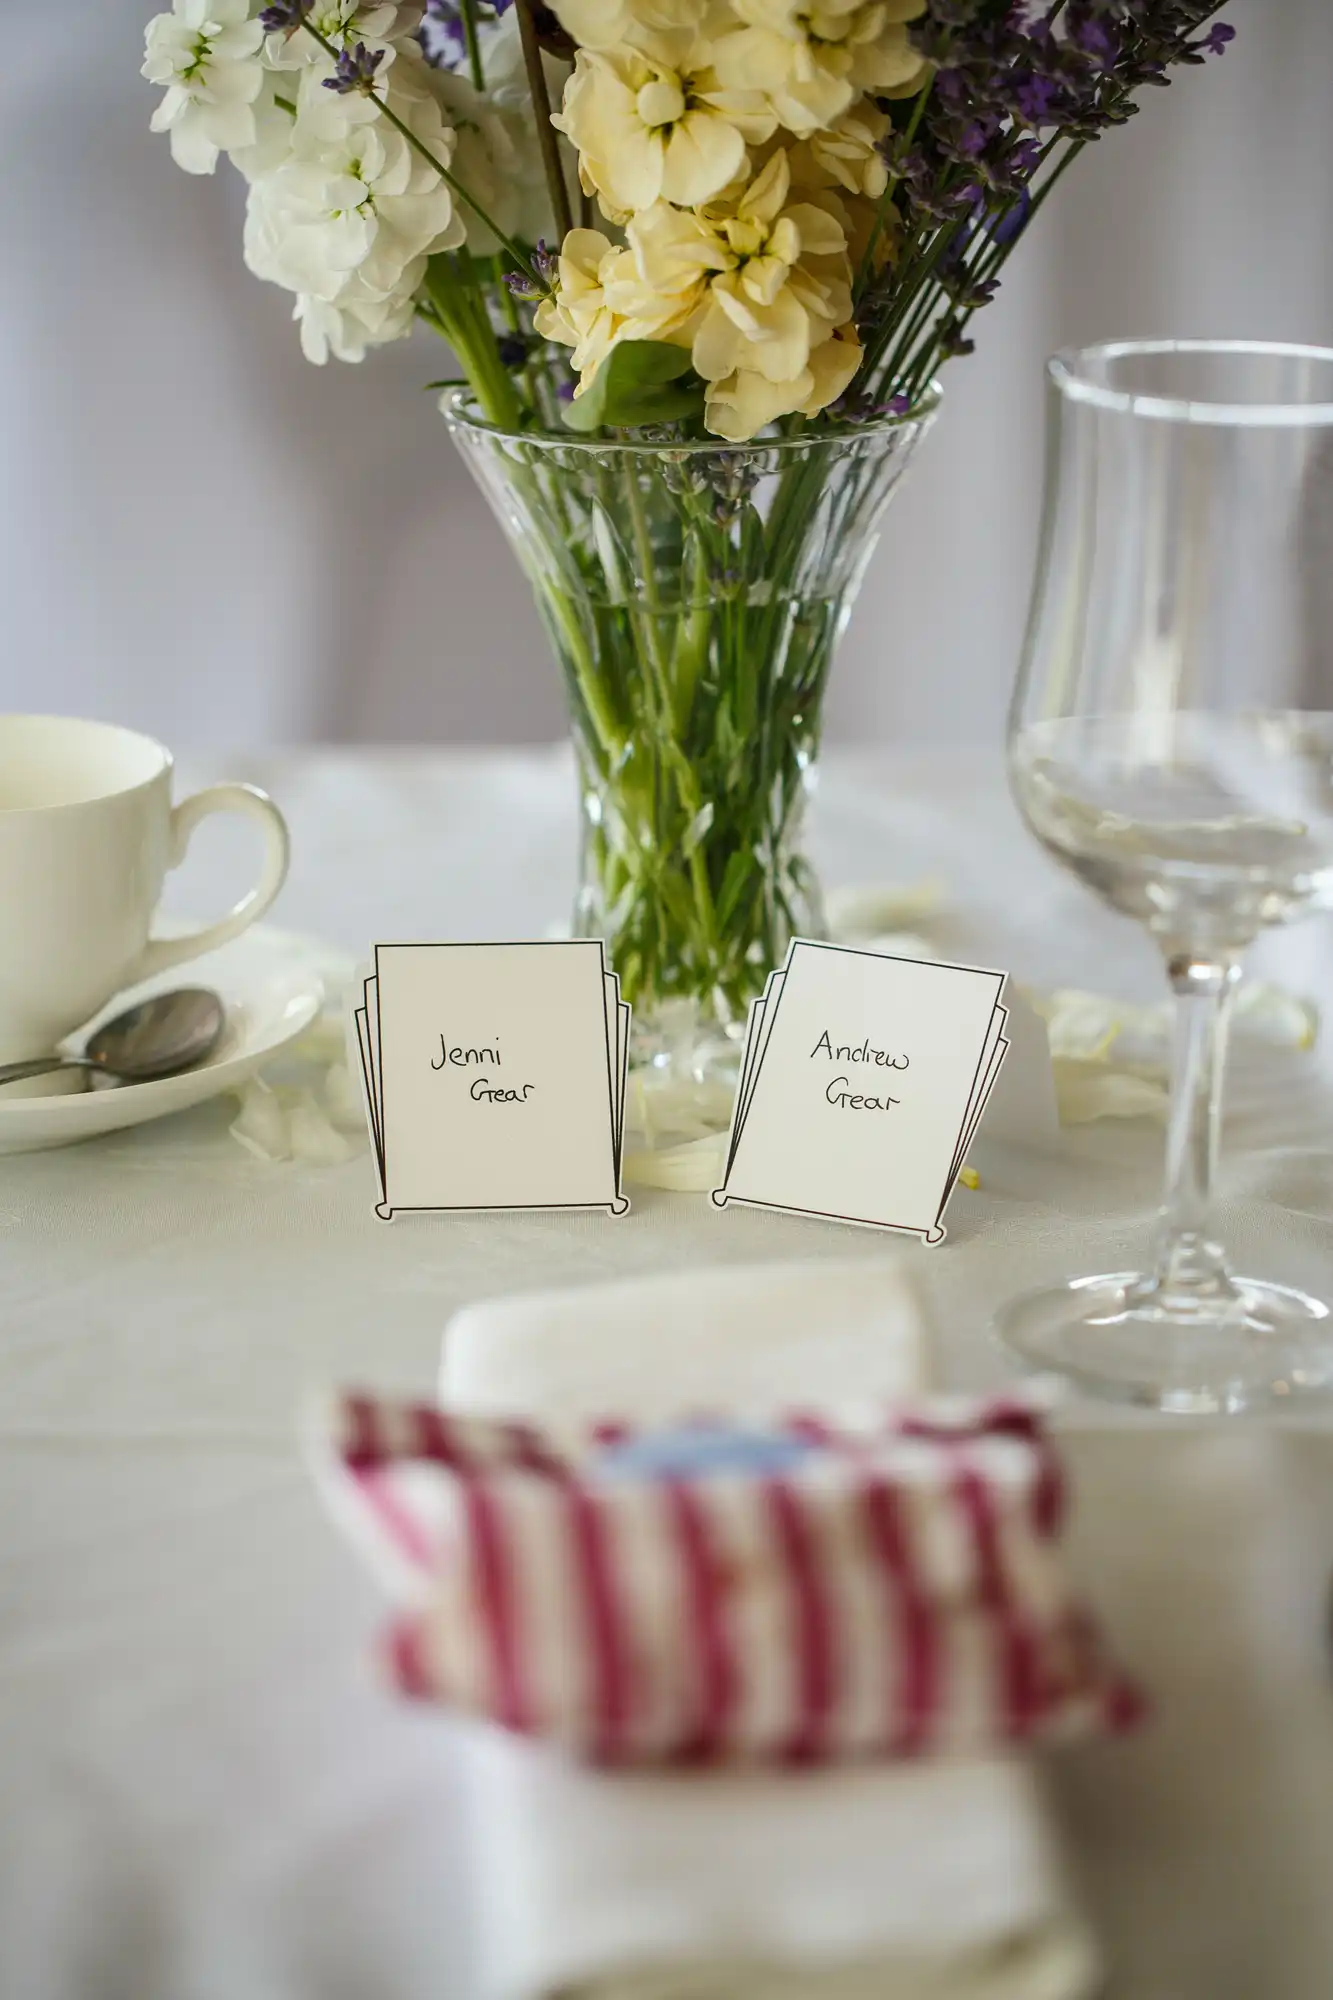 Elegant dining table setup featuring a bouquet of flowers in a vase, name cards for guests, a white teacup, and a napkin wrapped with a pink-striped ribbon.